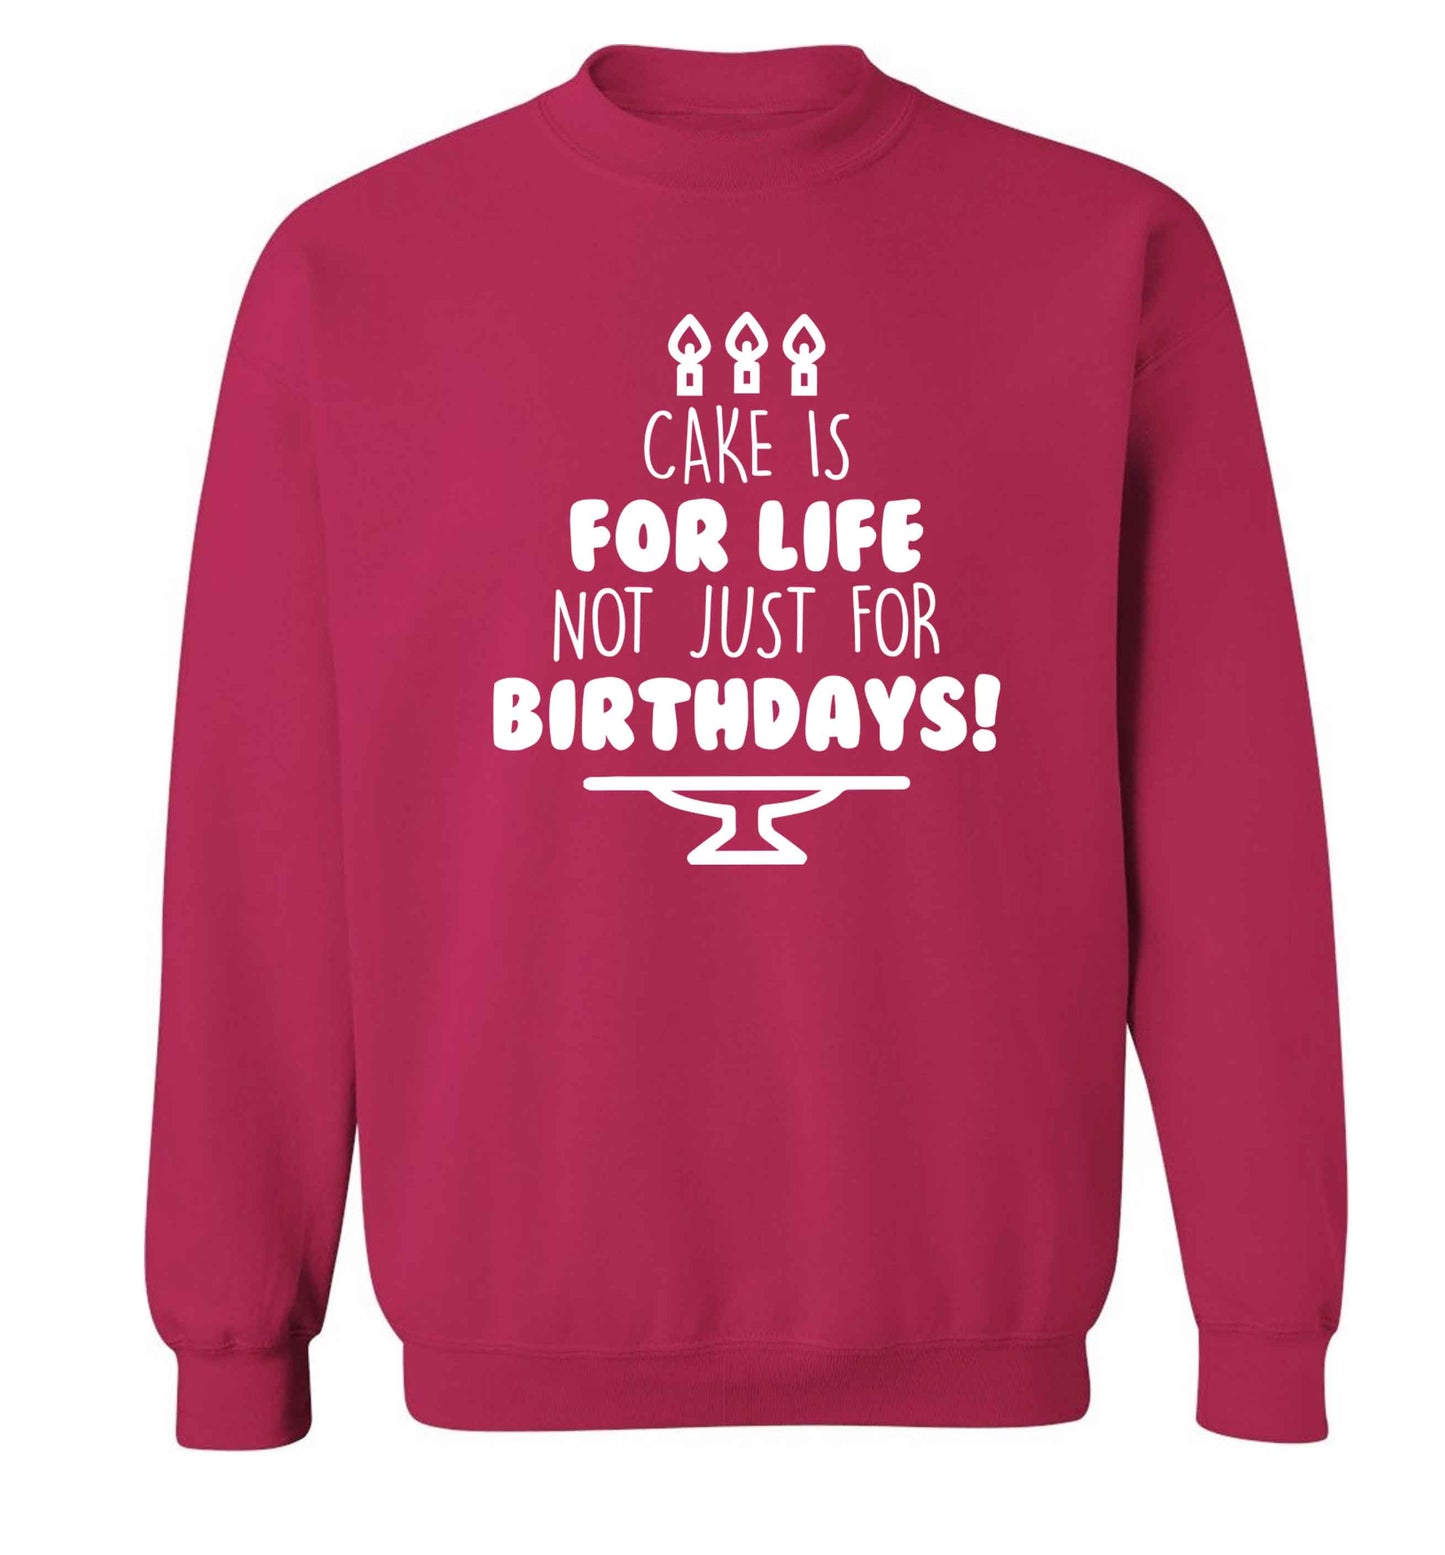 Cake is for life not just for birthdays Adult's unisex pink Sweater 2XL